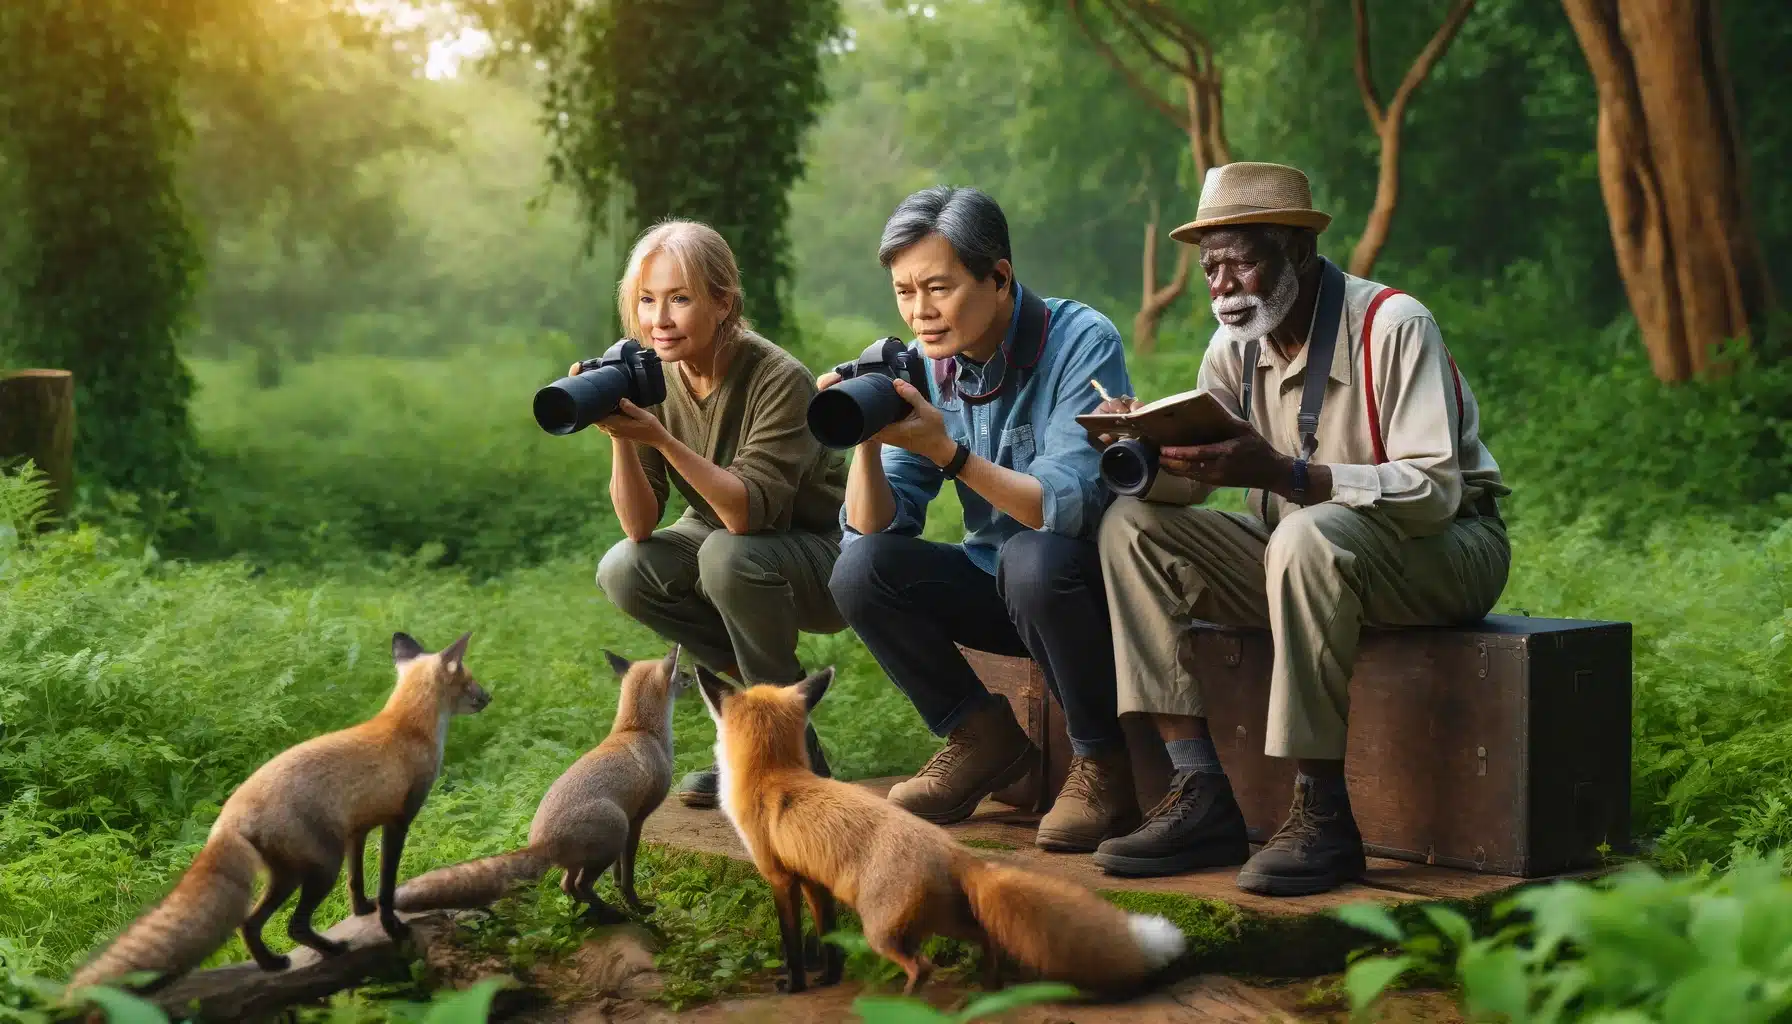 In a wildlife park, three photographers—a Caucasian woman, an African man, and an elderly Asian man—utilize various wildlife photography tools to observe and document animals like birds and foxes, showcasing practical techniques for enhanced field observations.